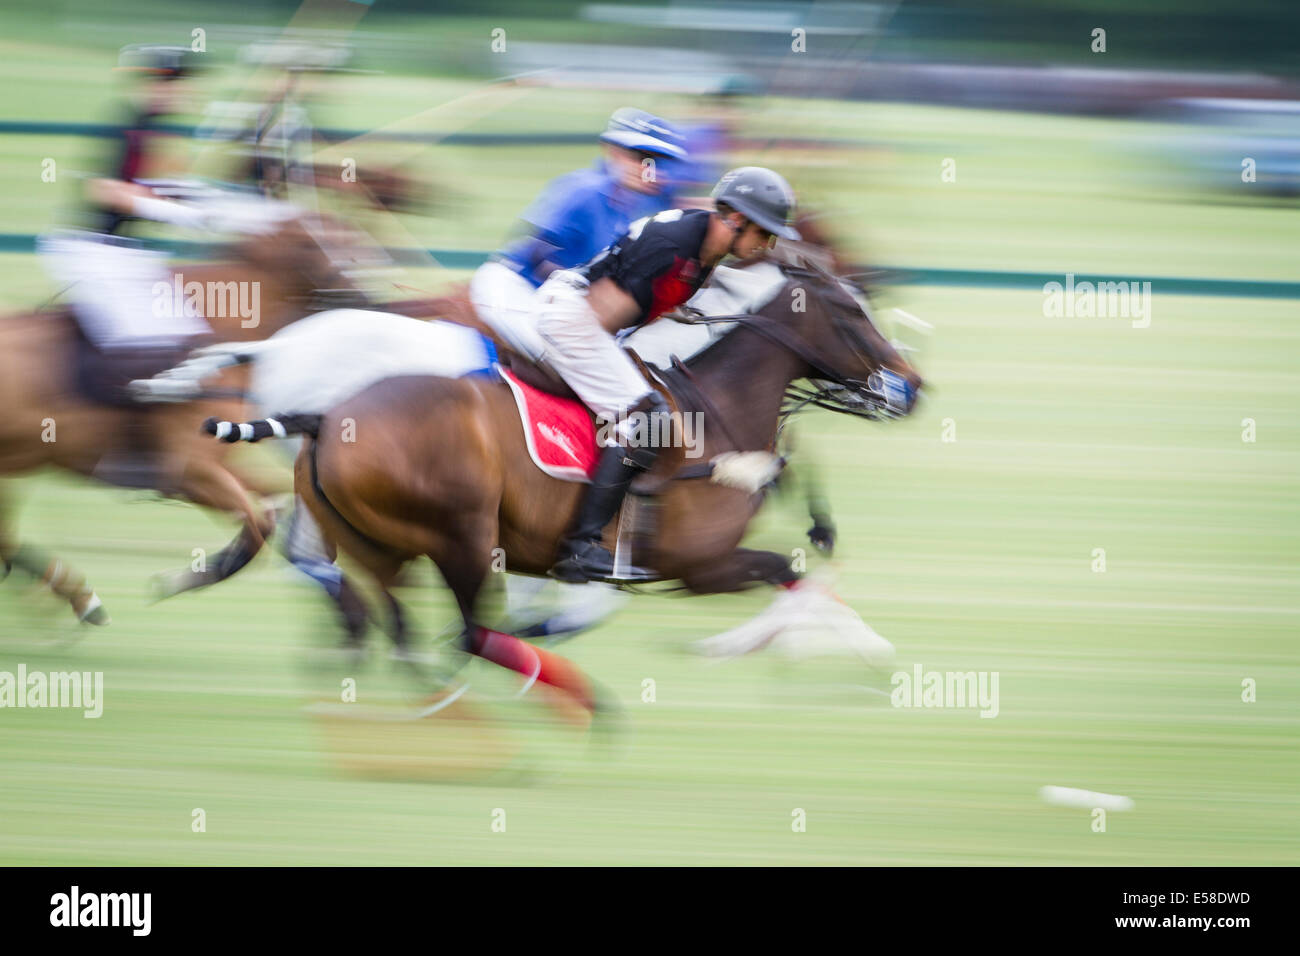 Jonny Good and competitors are blurred as he launches an attack for Clashleigh in a polo match at Cowdray Park. Stock Photo